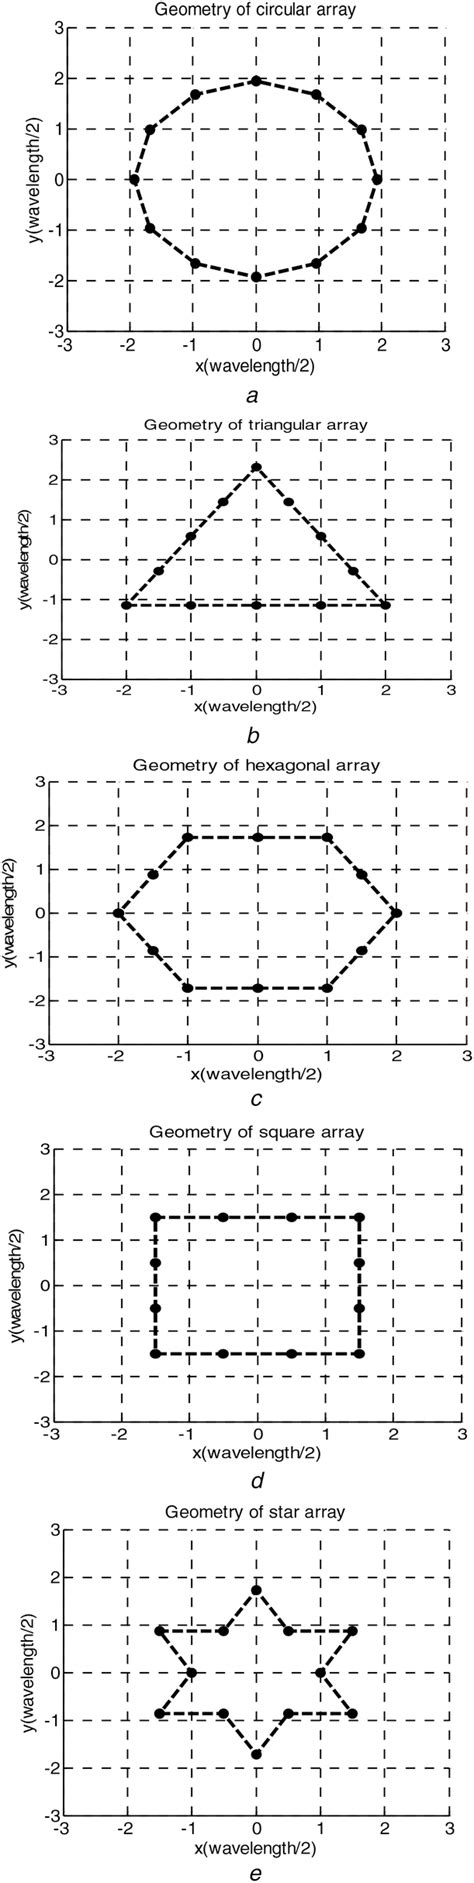 Planar Array 2d Array Configurations Surveyed In This Study